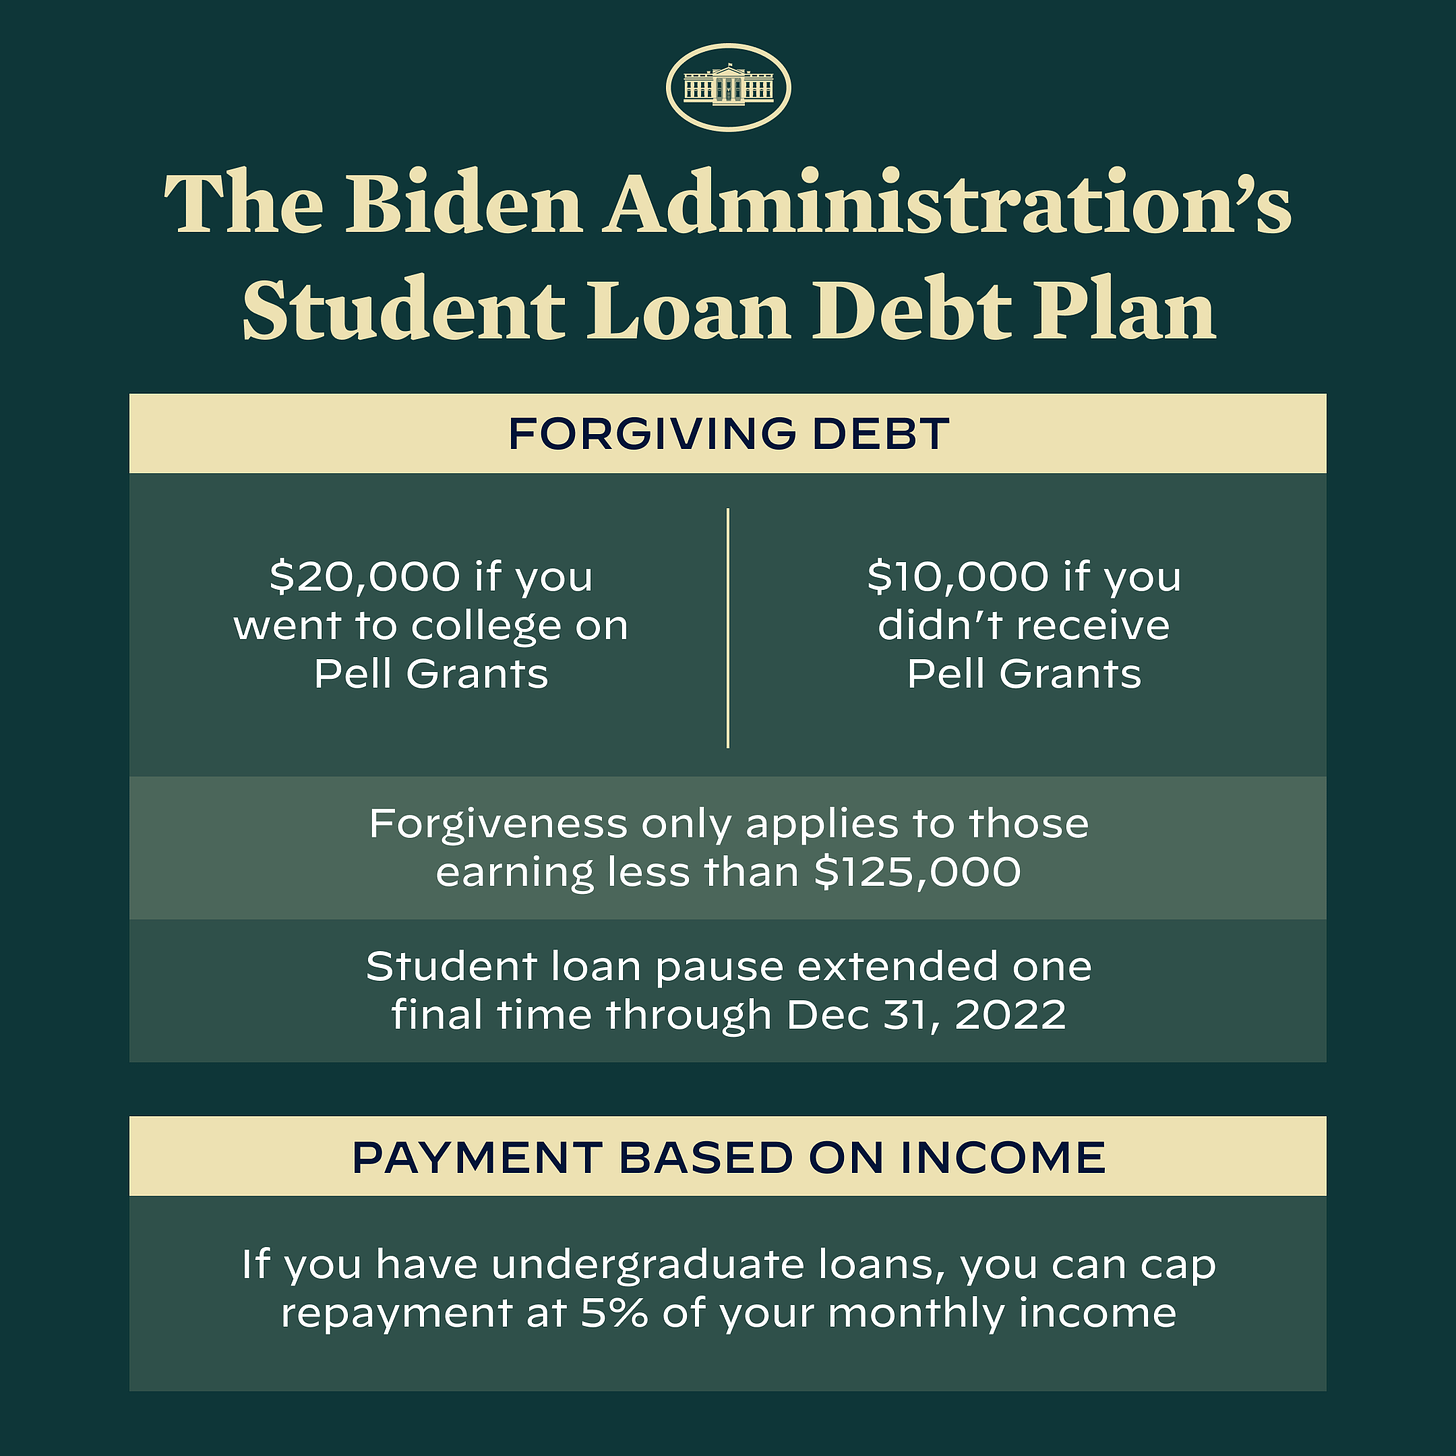 The Biden Administration's Student Loan Debt Plan:

Forgiving debt:
$20,000 if you went to college on Pell Grants
$10,000 if you didn't receive Pell Grants

Forgiveness only applies to those earling less than $125,000

Student loan pause extended one final time through Dec 31, 2022

Payment based on income:
If you have undergraduate loans, you can cap repayment at 5% of your monthly income.